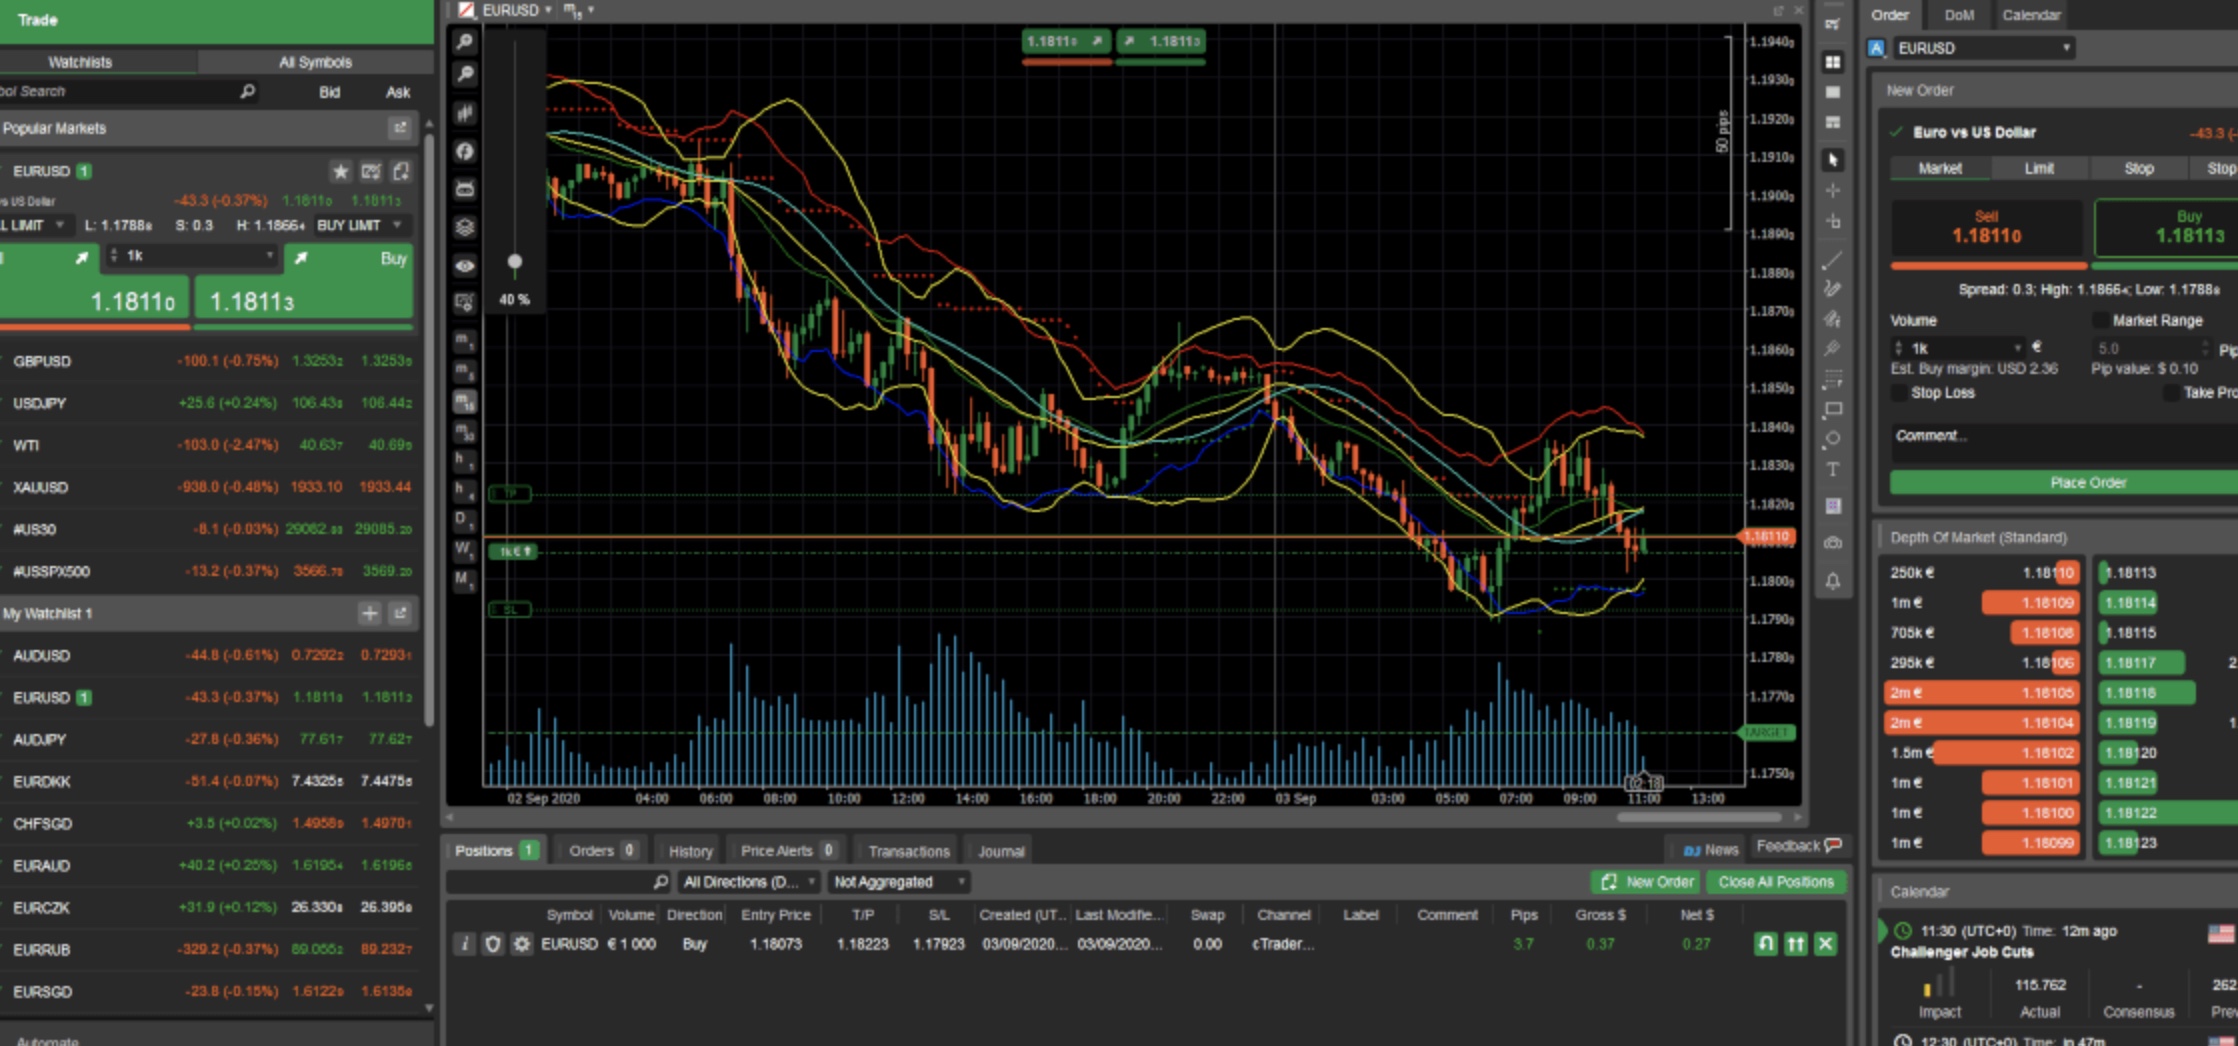 whats tthe smallest trade i can make on fxpro ctrader